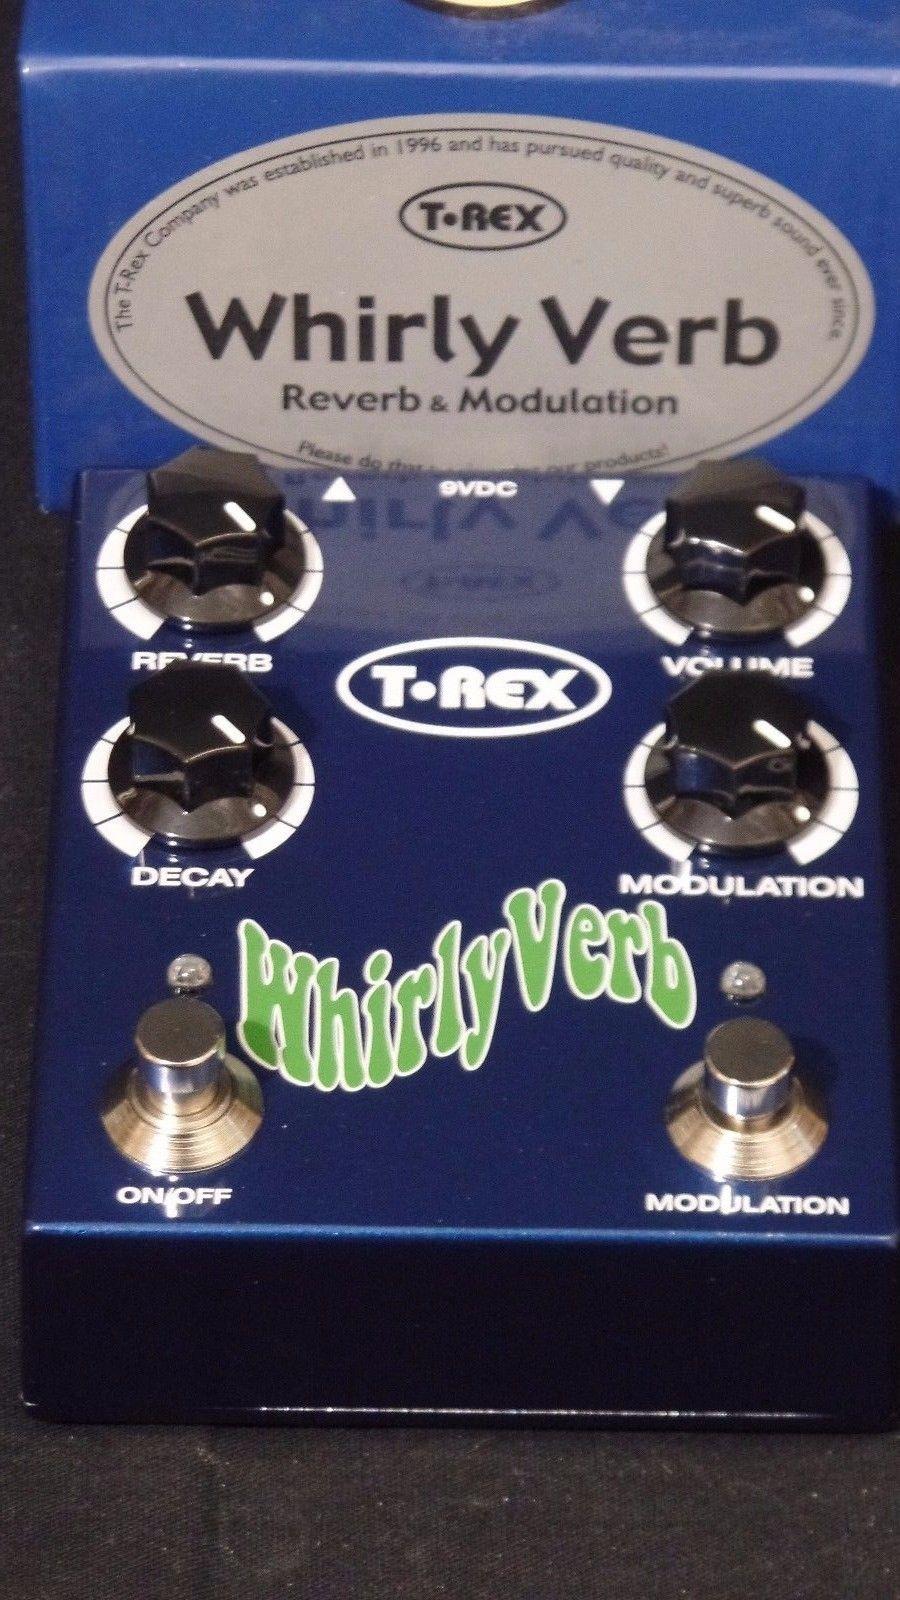 T-Rex Whirlyverb Reverb Electric Guitar Effects FX Pedal TRex Whirly Verb #3